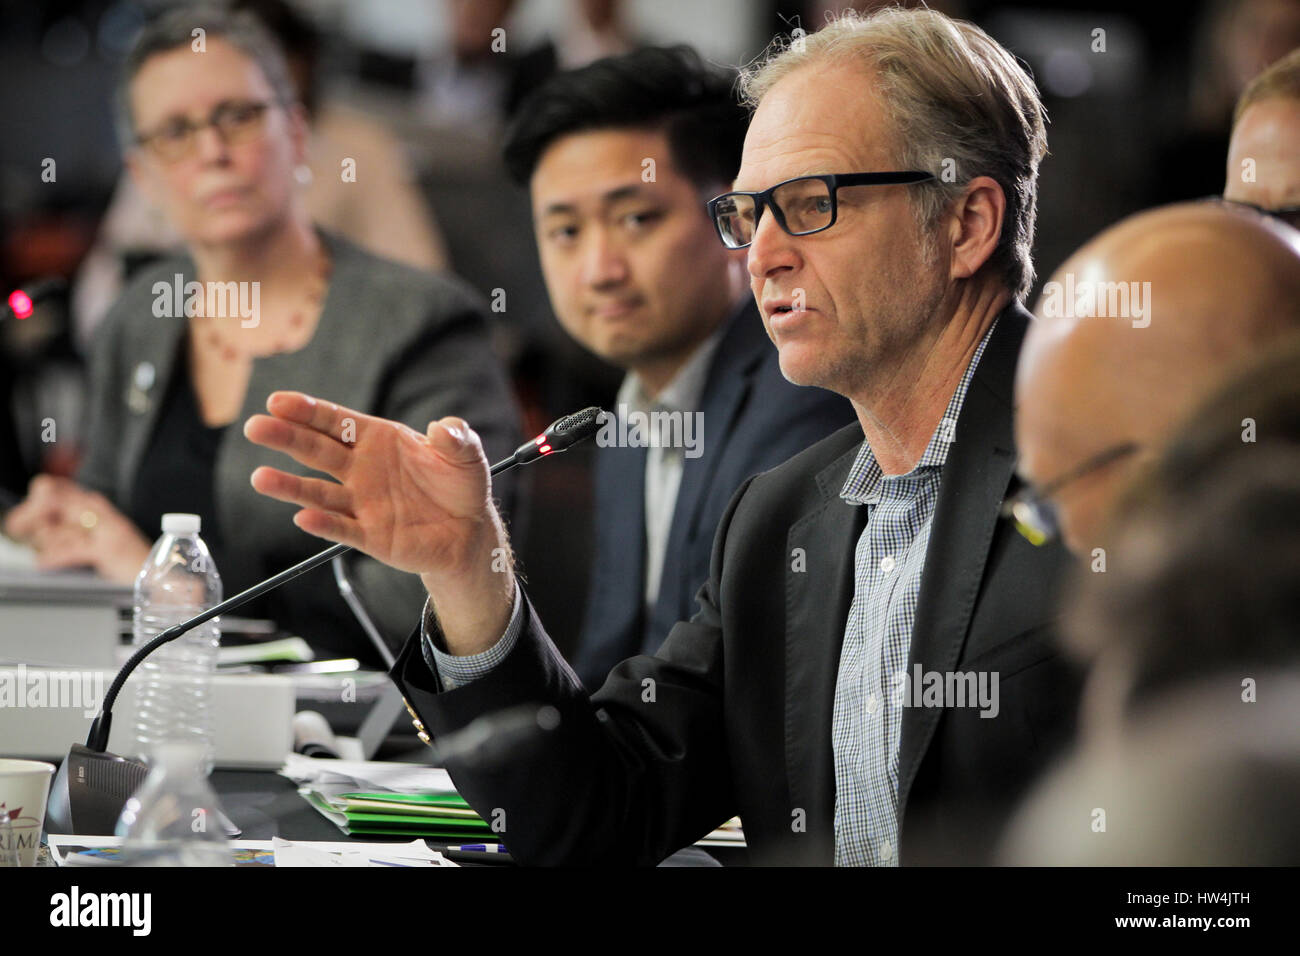 Jim Van Dyke, CEO of Futurion and board member of the  U.S. CFPB during public hearings of the Consumer Advisory Board March 2, 2017 in Washington, DC. The Consumer Financial Protection Bureau is an independent federal watchdog agency to protect consumers from financial fraud, crime and abuse. Stock Photo